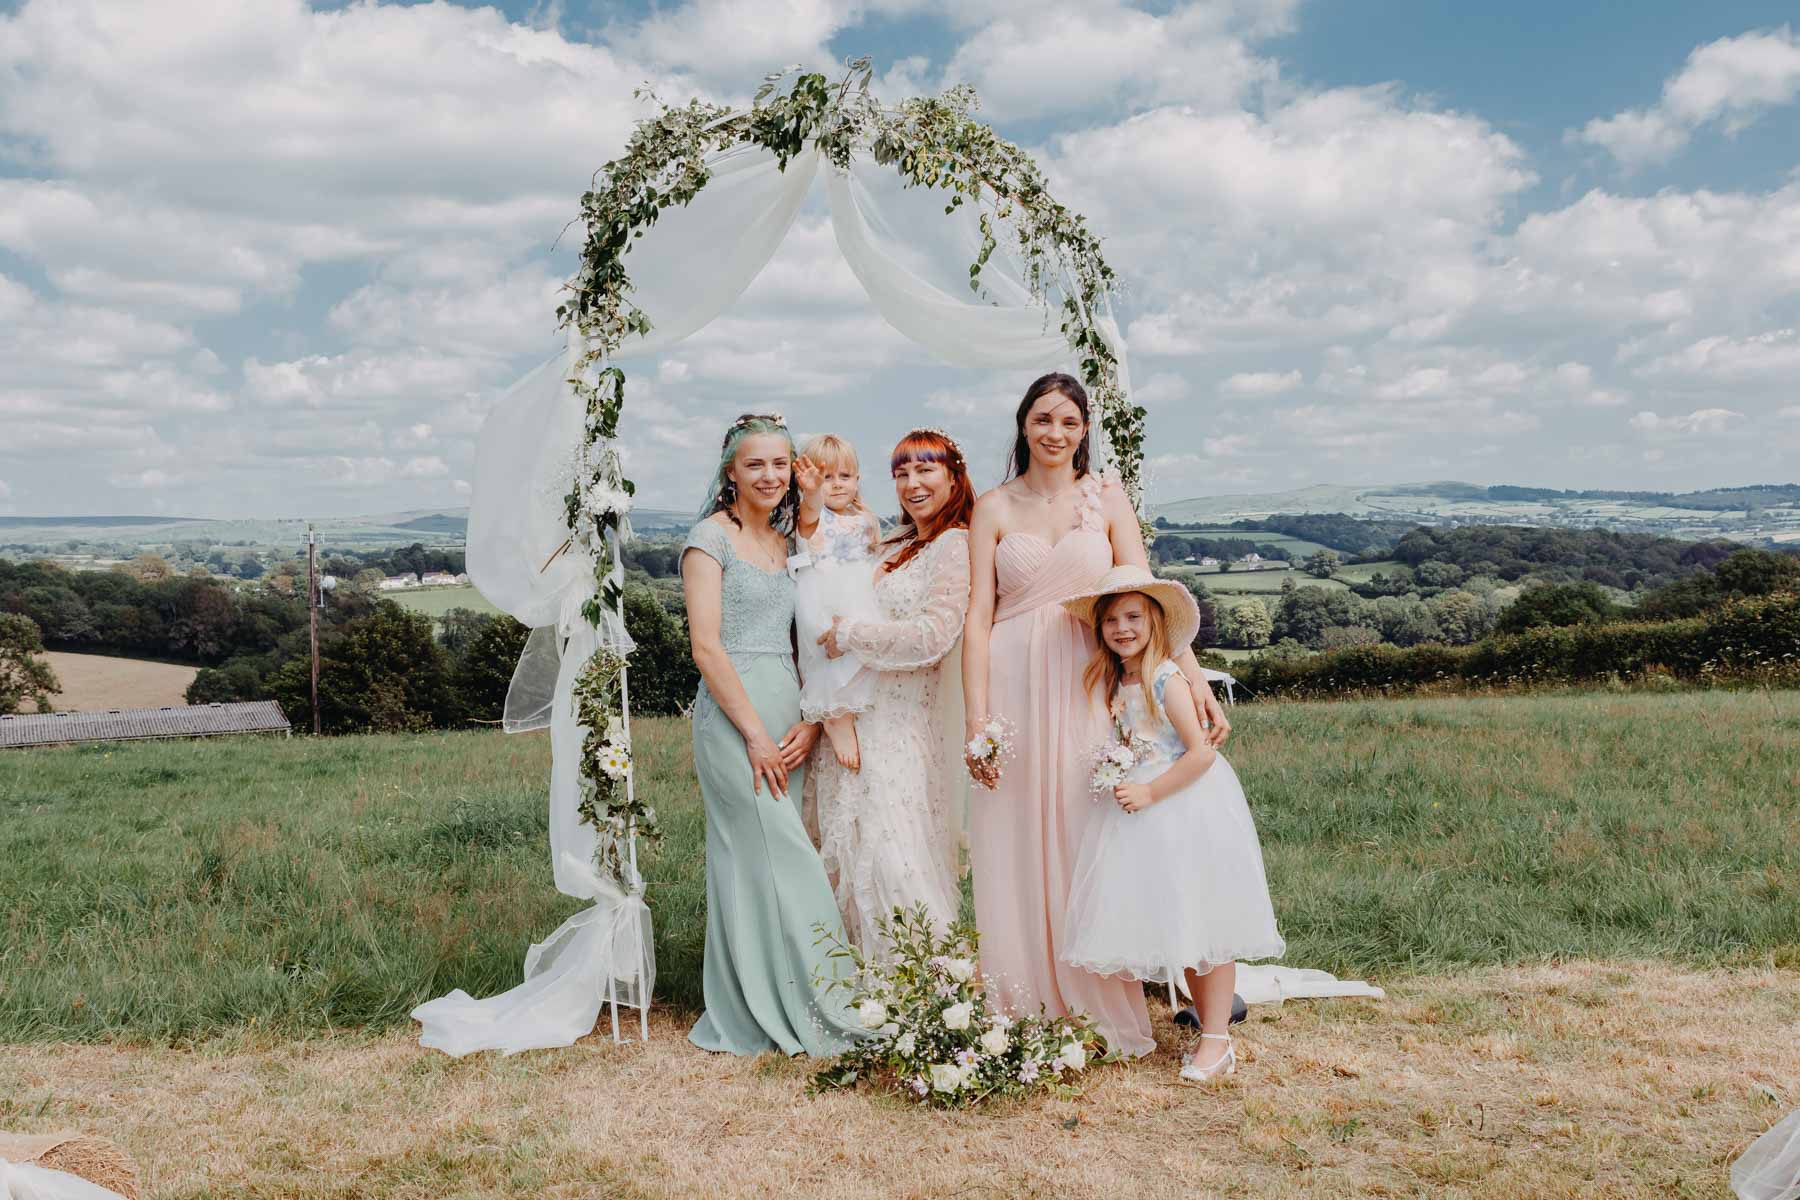 The bride and two bridesmaids and two small girls in the group photo after the handfasting ceremony